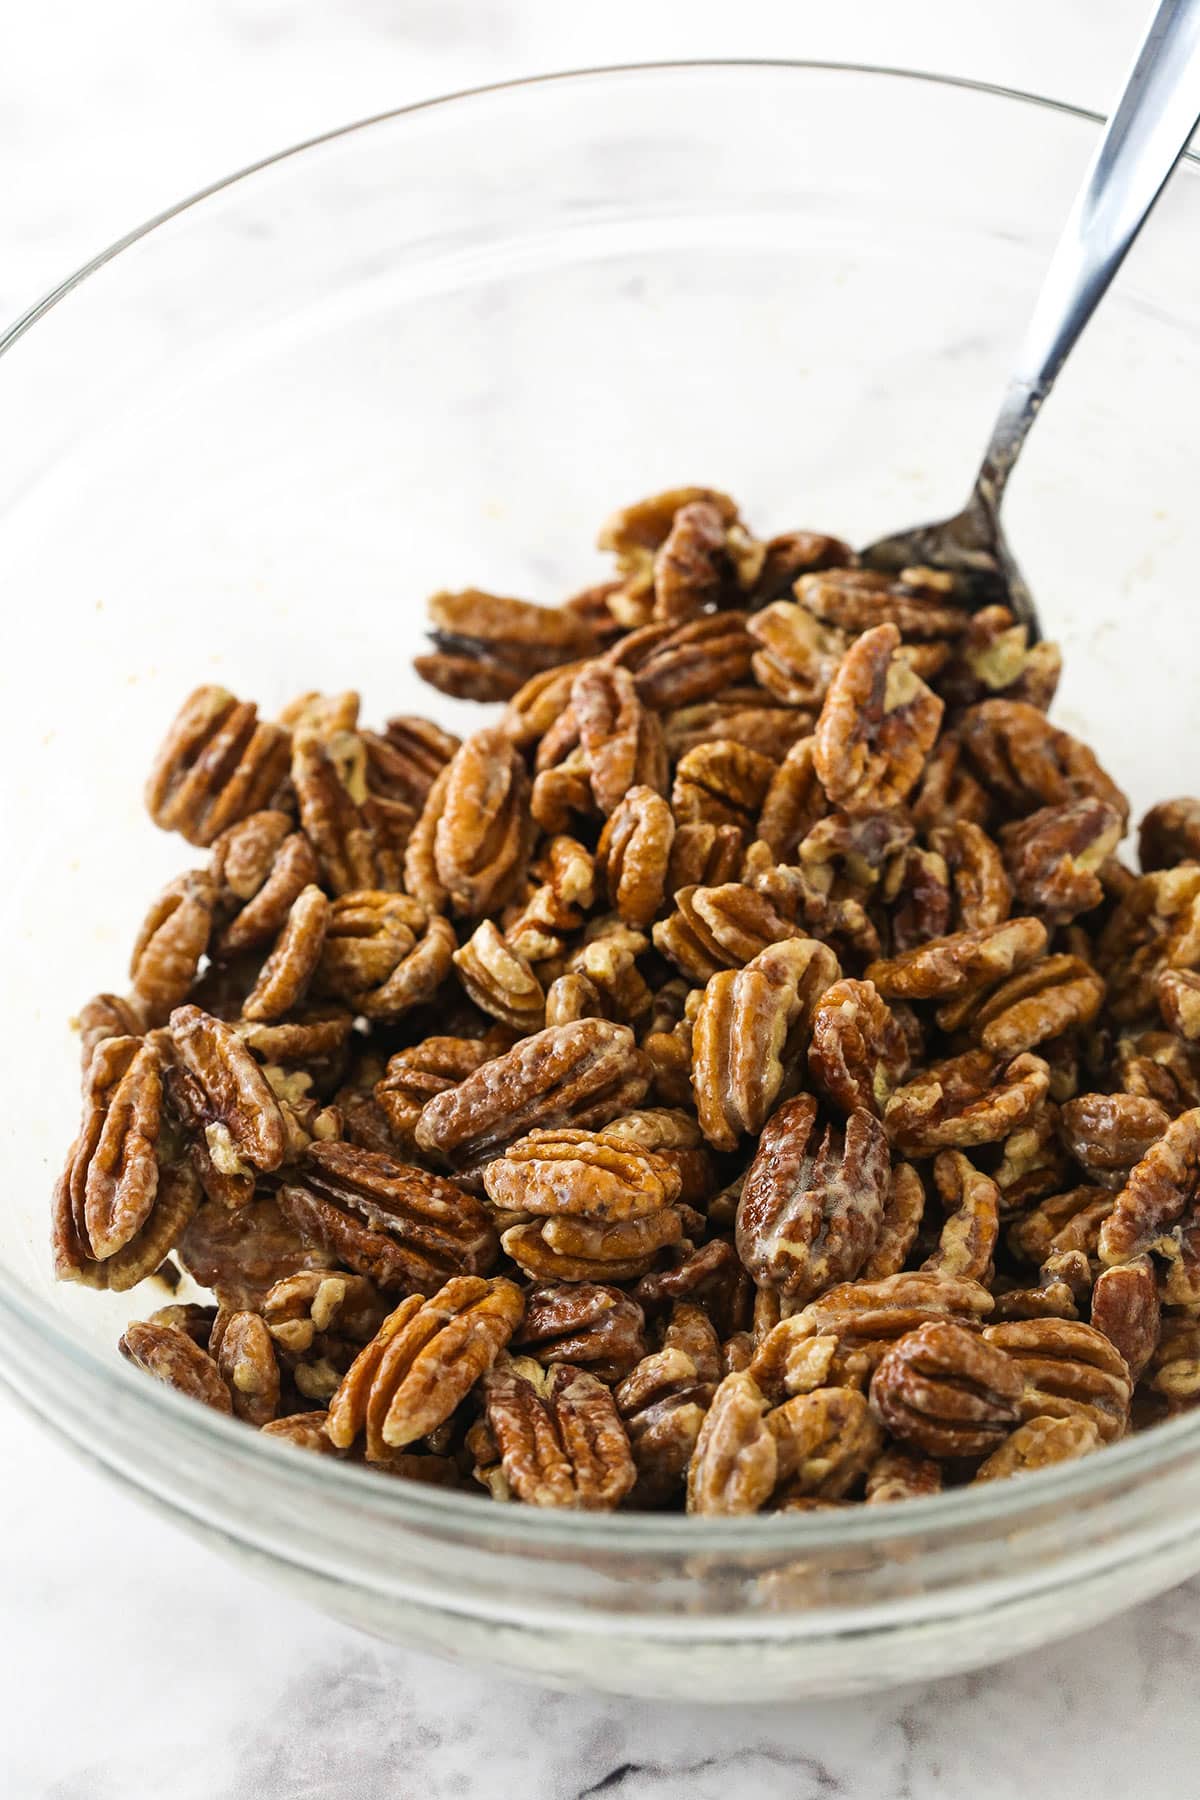 A bowl of pecans coated in a mixture of whipped egg white, vanilla and butter